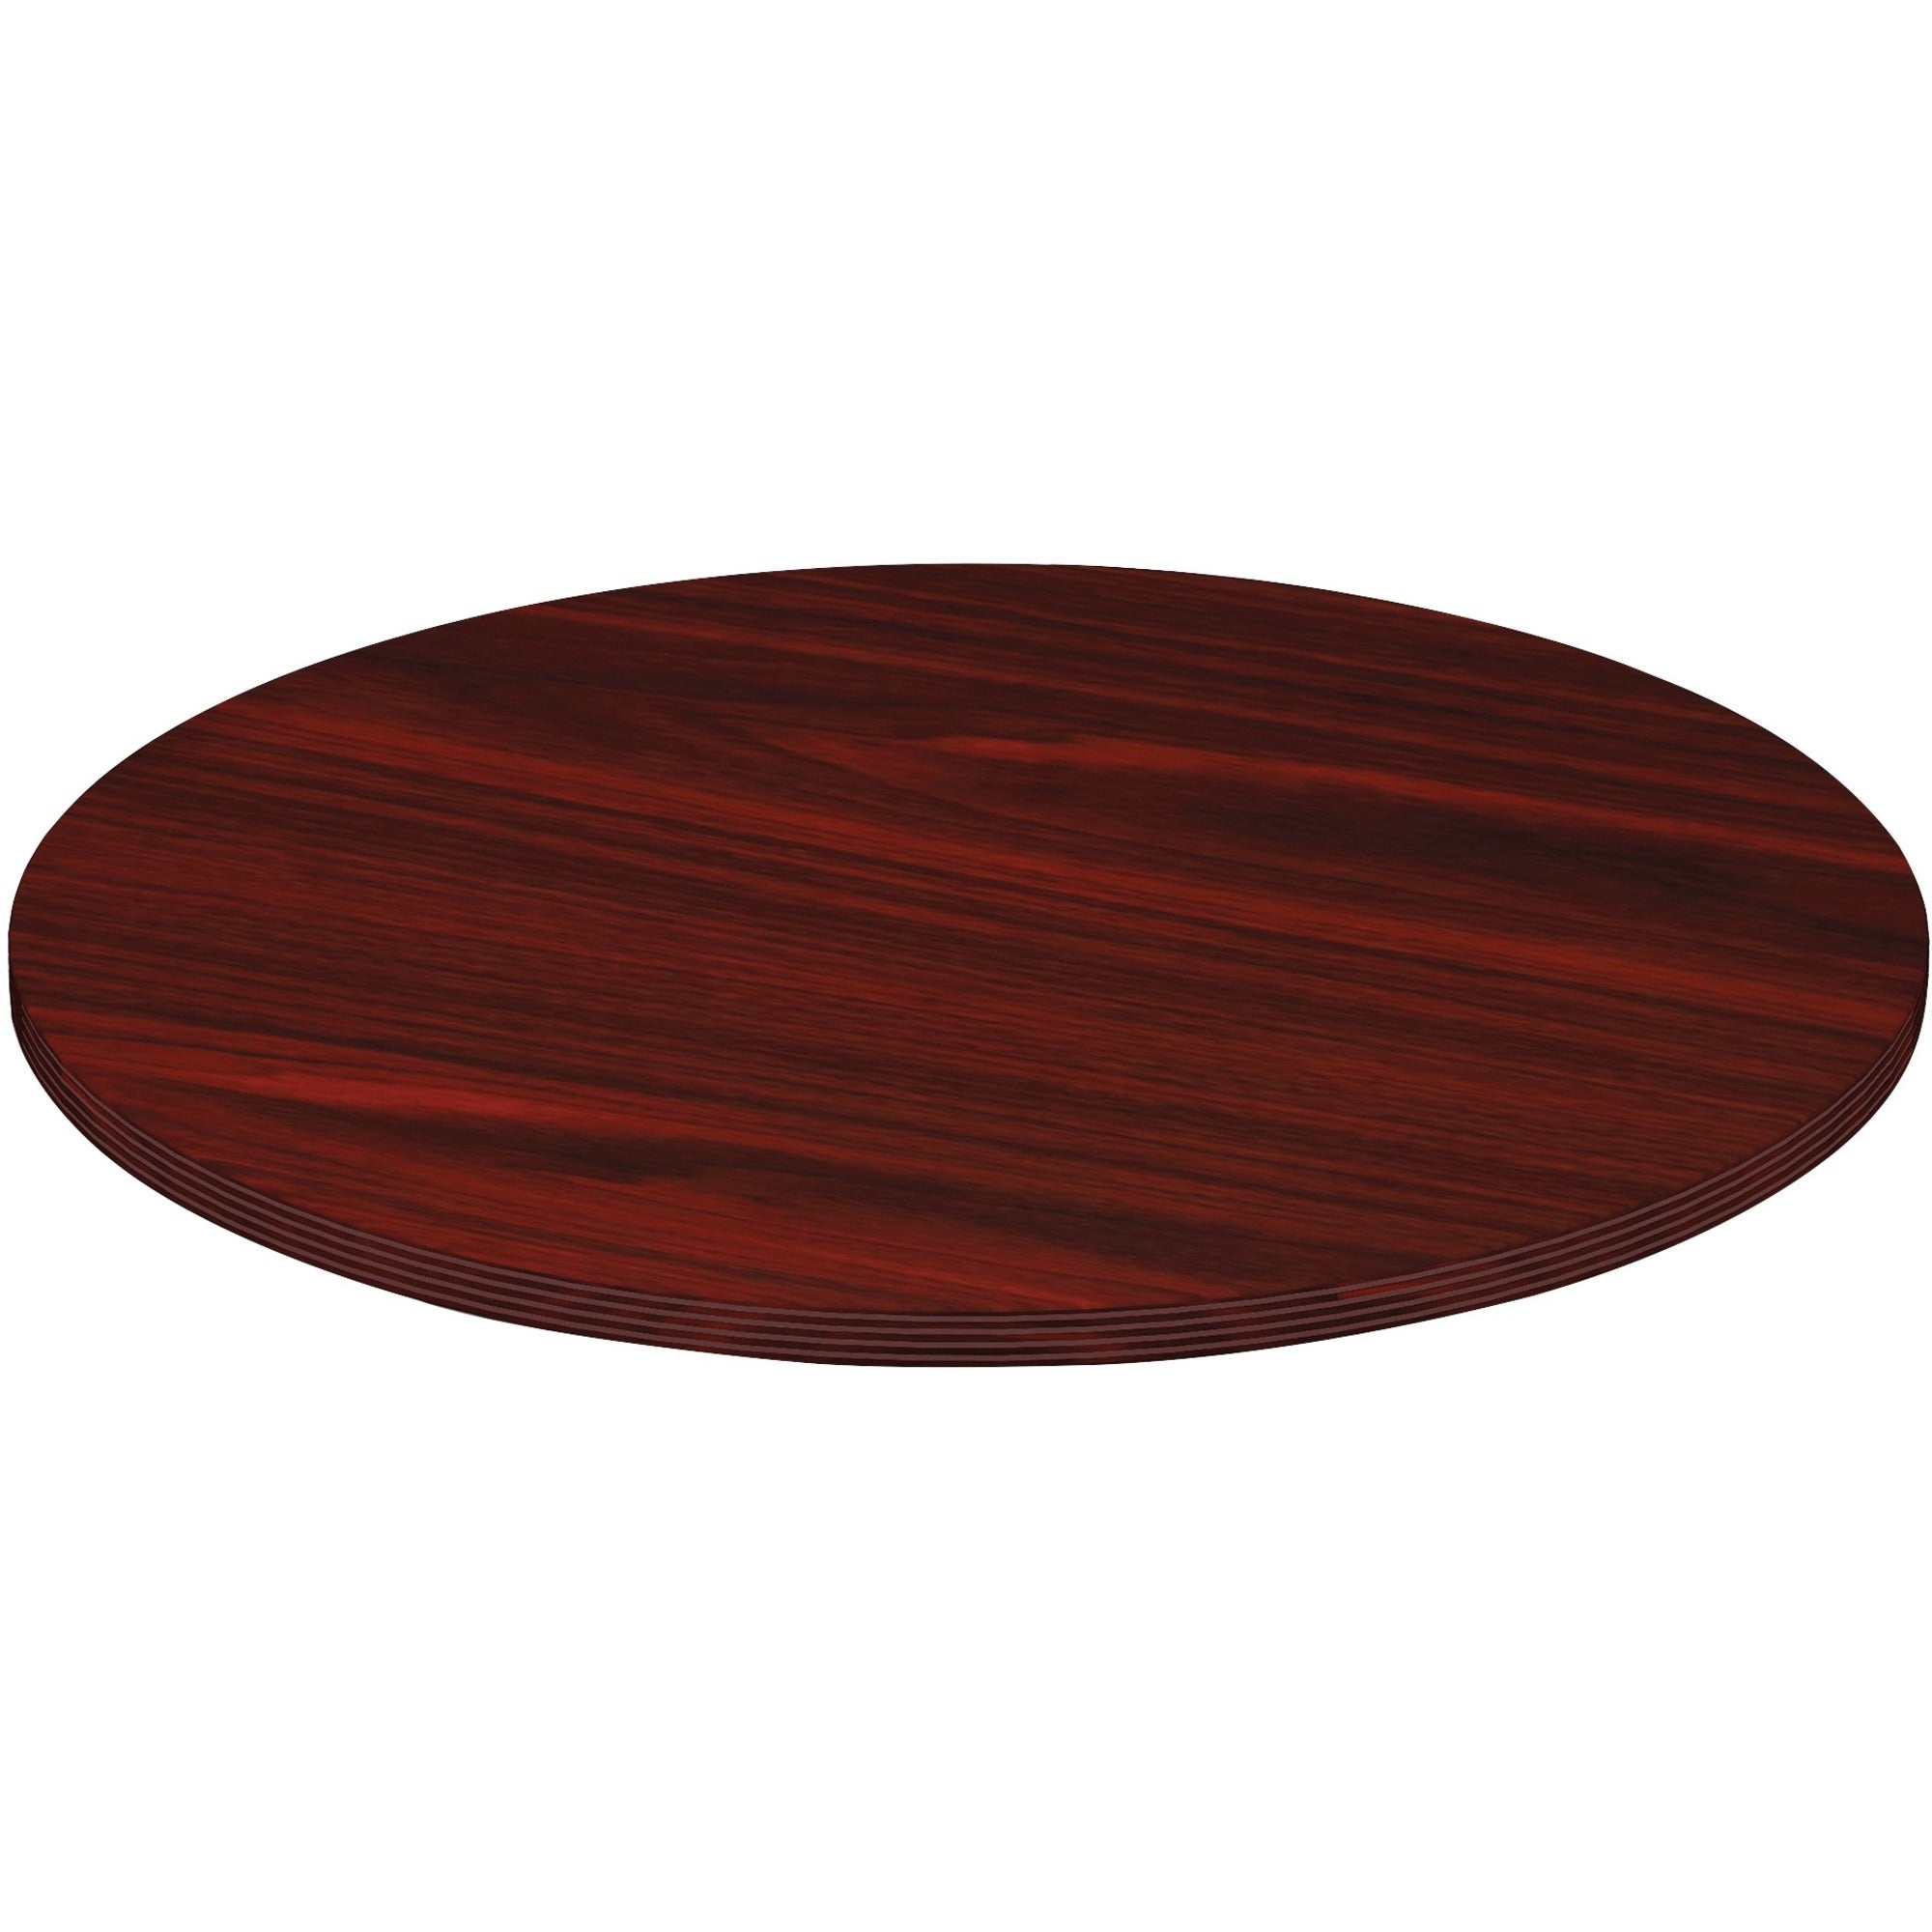 lorell-chateau-series-round-conference-tabletop-48-reeded-edge-finish-mahogany-laminate_llr34353 - 1